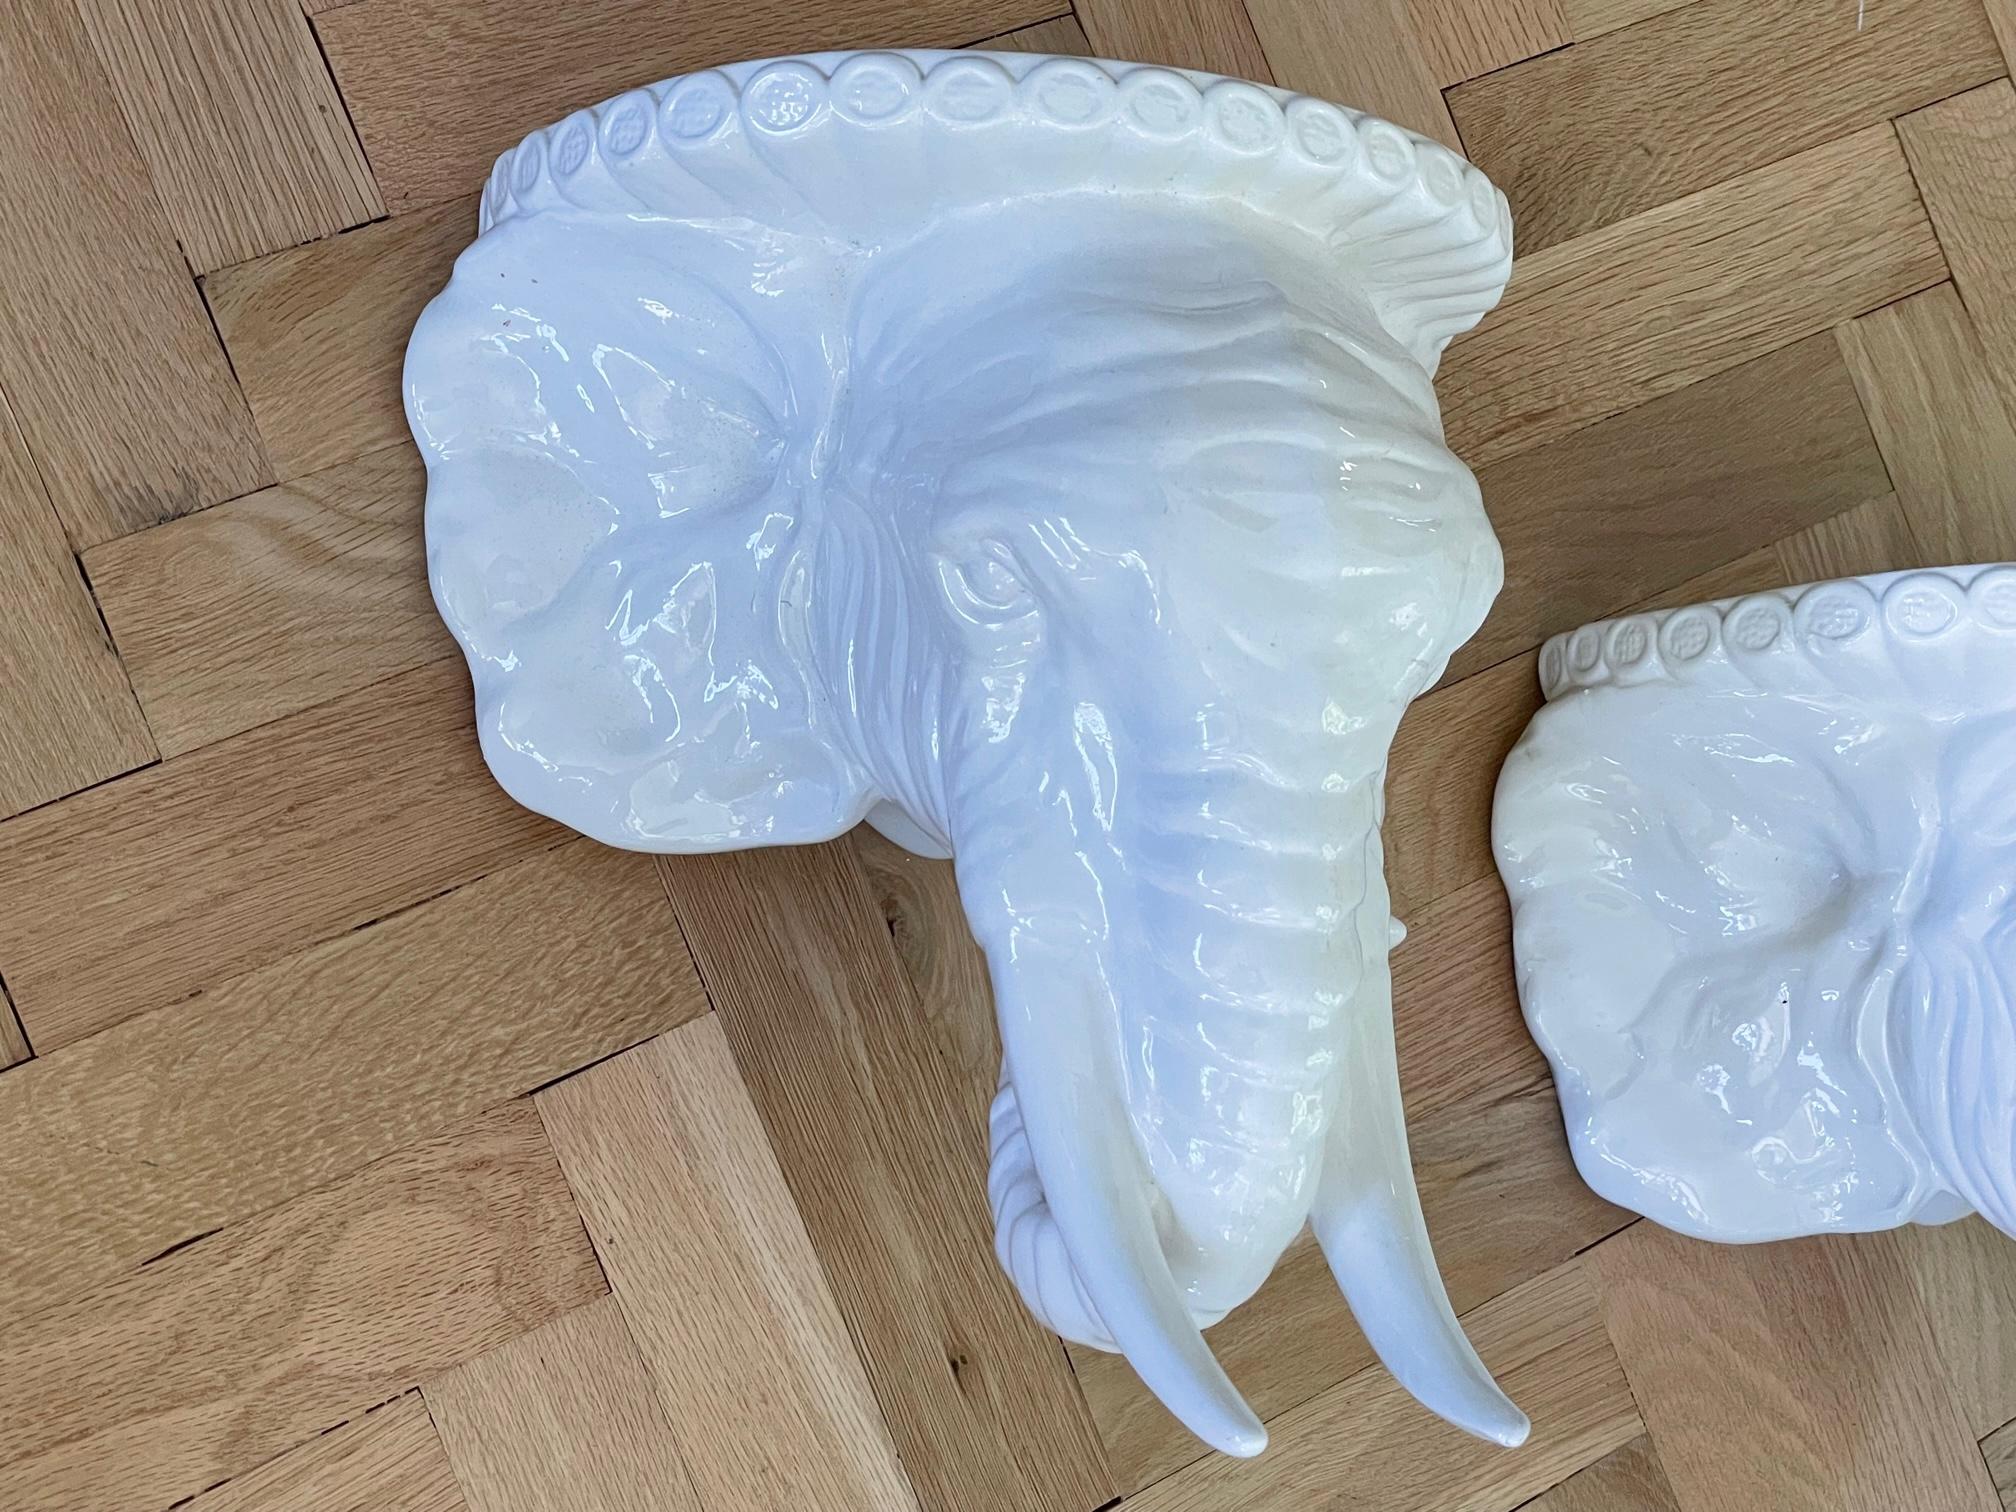 Pair of sculptural elephant wall shelves made in Italy. Heavy glaze and bright white finish. Good condition, no chips or cracks.

  